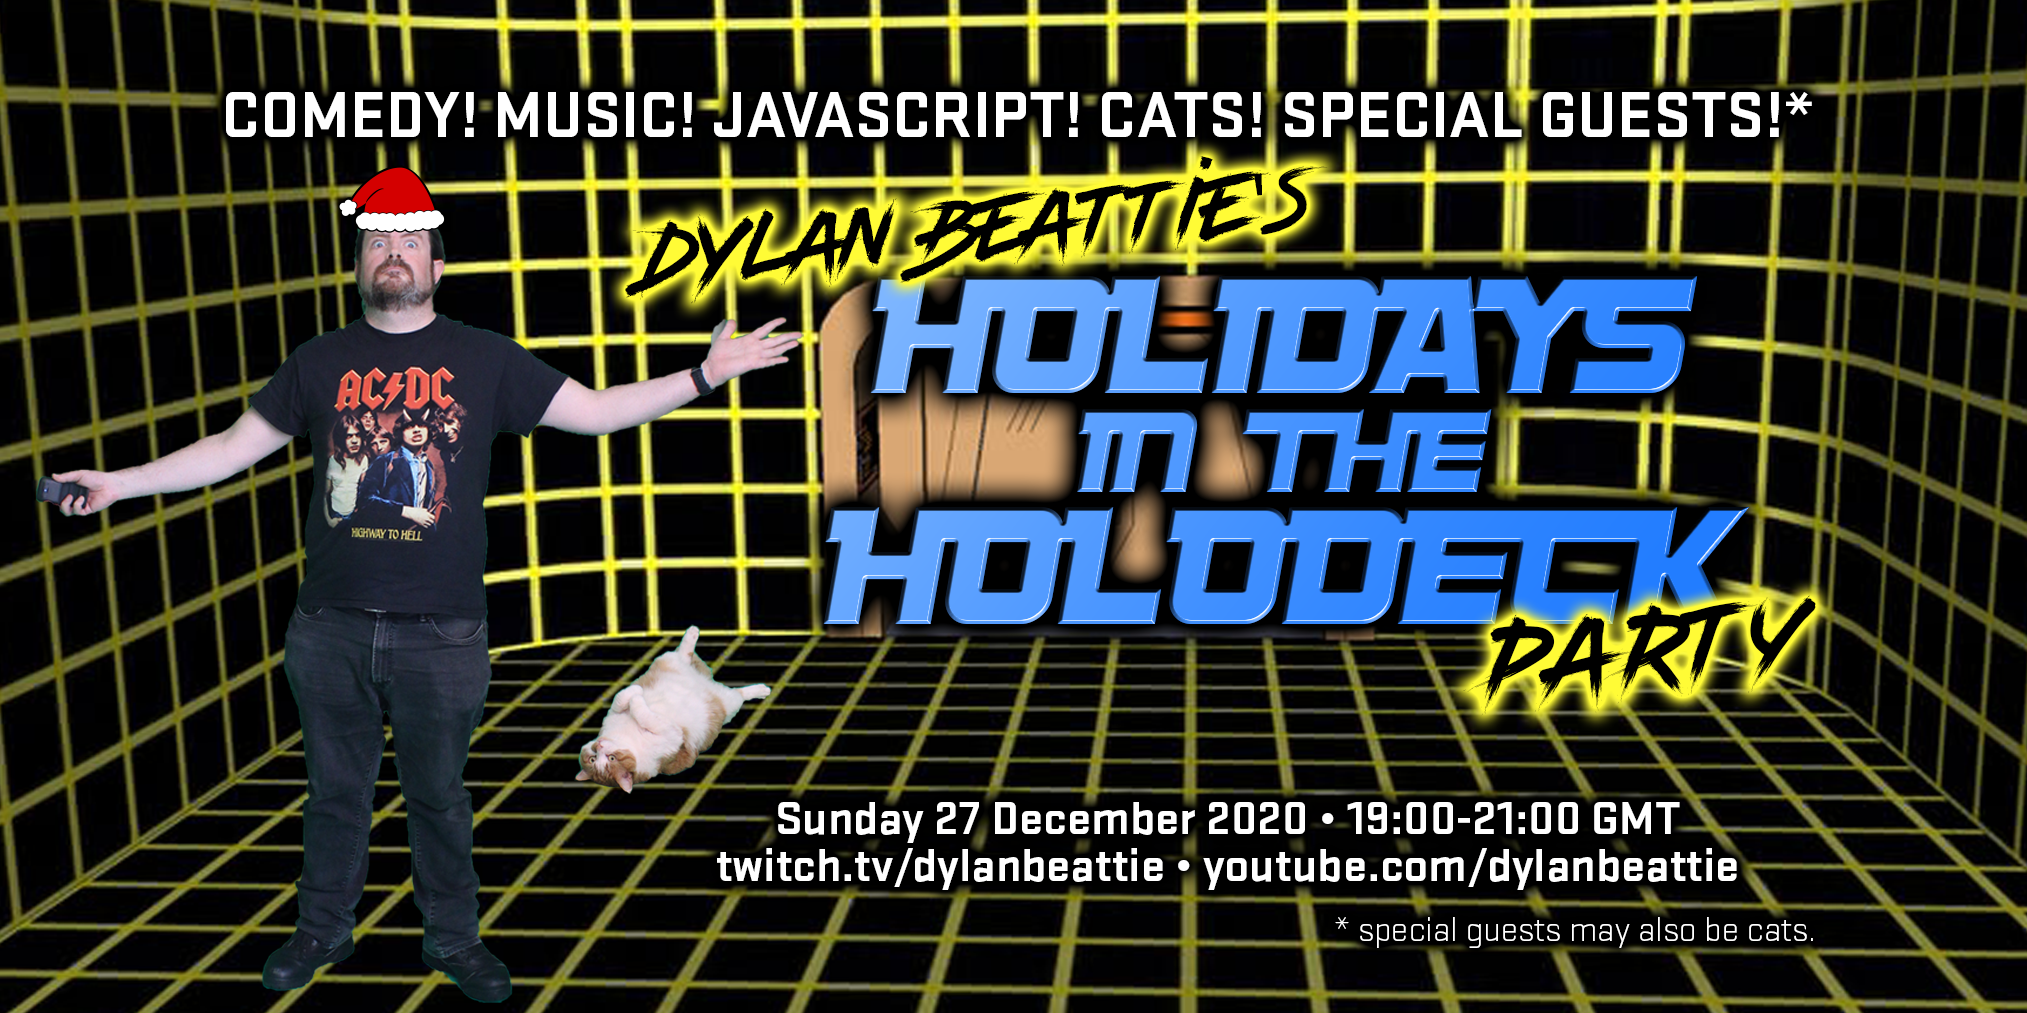 A poster for Dylan Beattie's livestreamed Christmas party